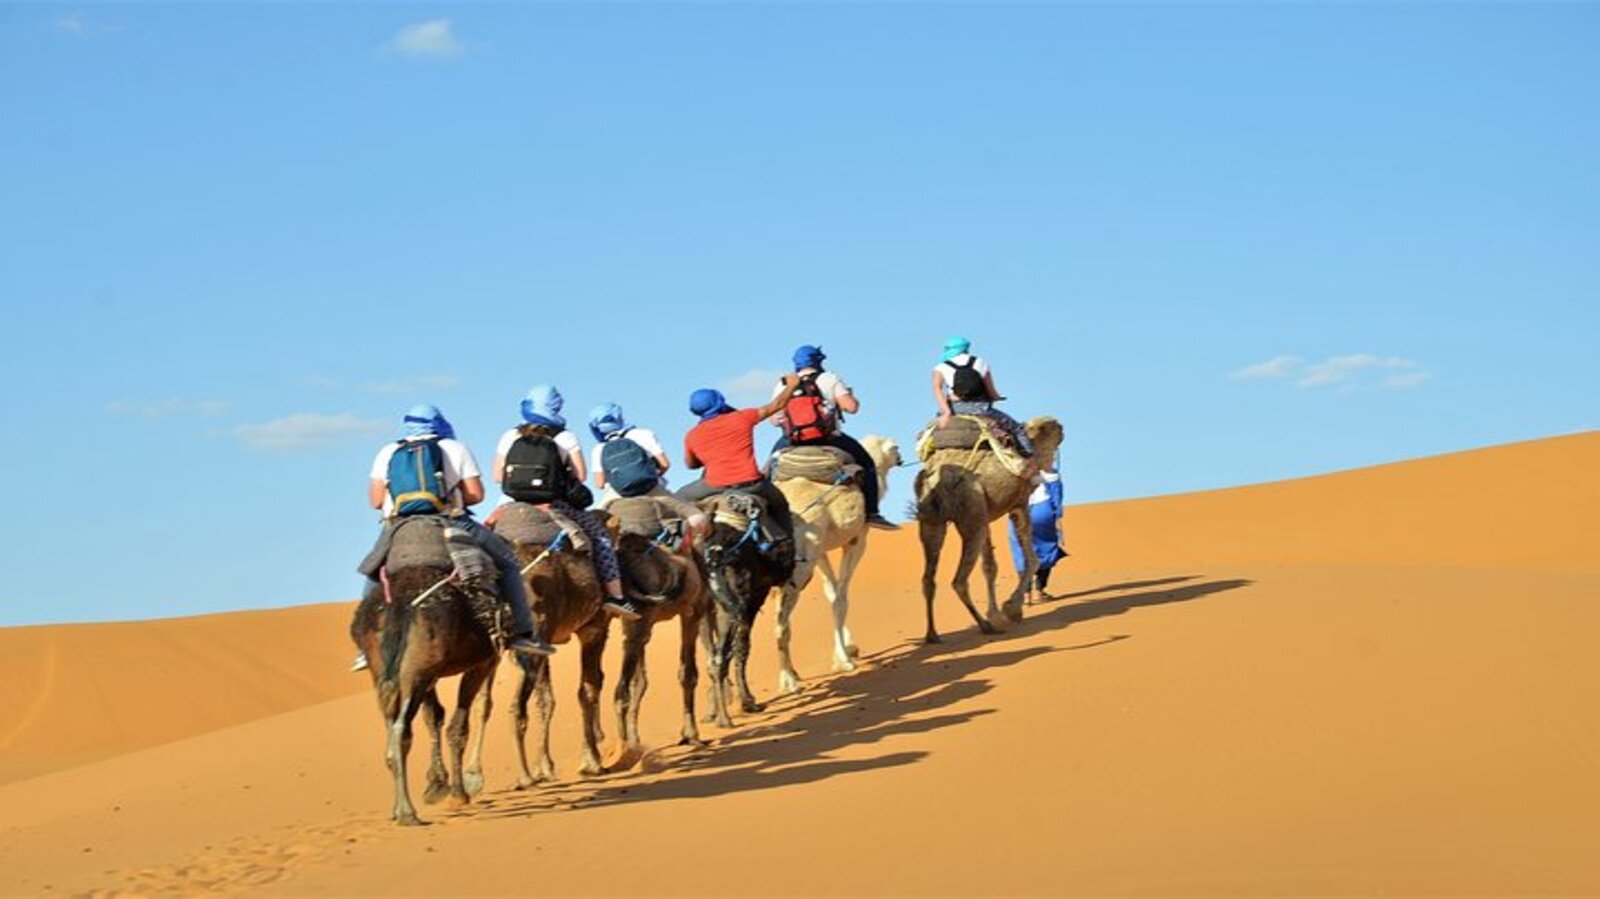 A 10-day tour of Moroccan adventures - RMT